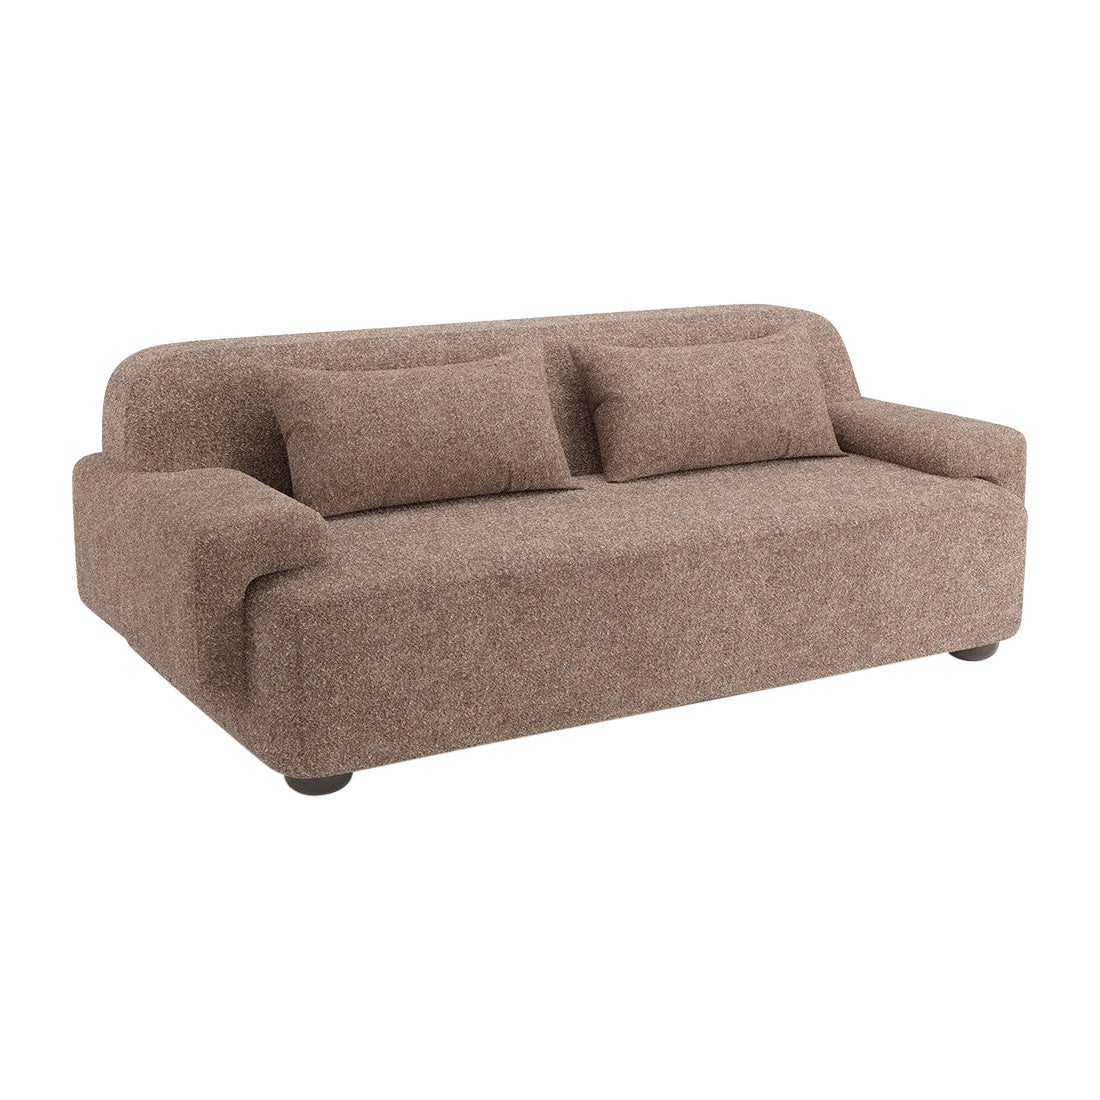 Popus Editions Lena 3 Seater Sofa in Mole Taupe Antwerp Linen Upholstery For Sale